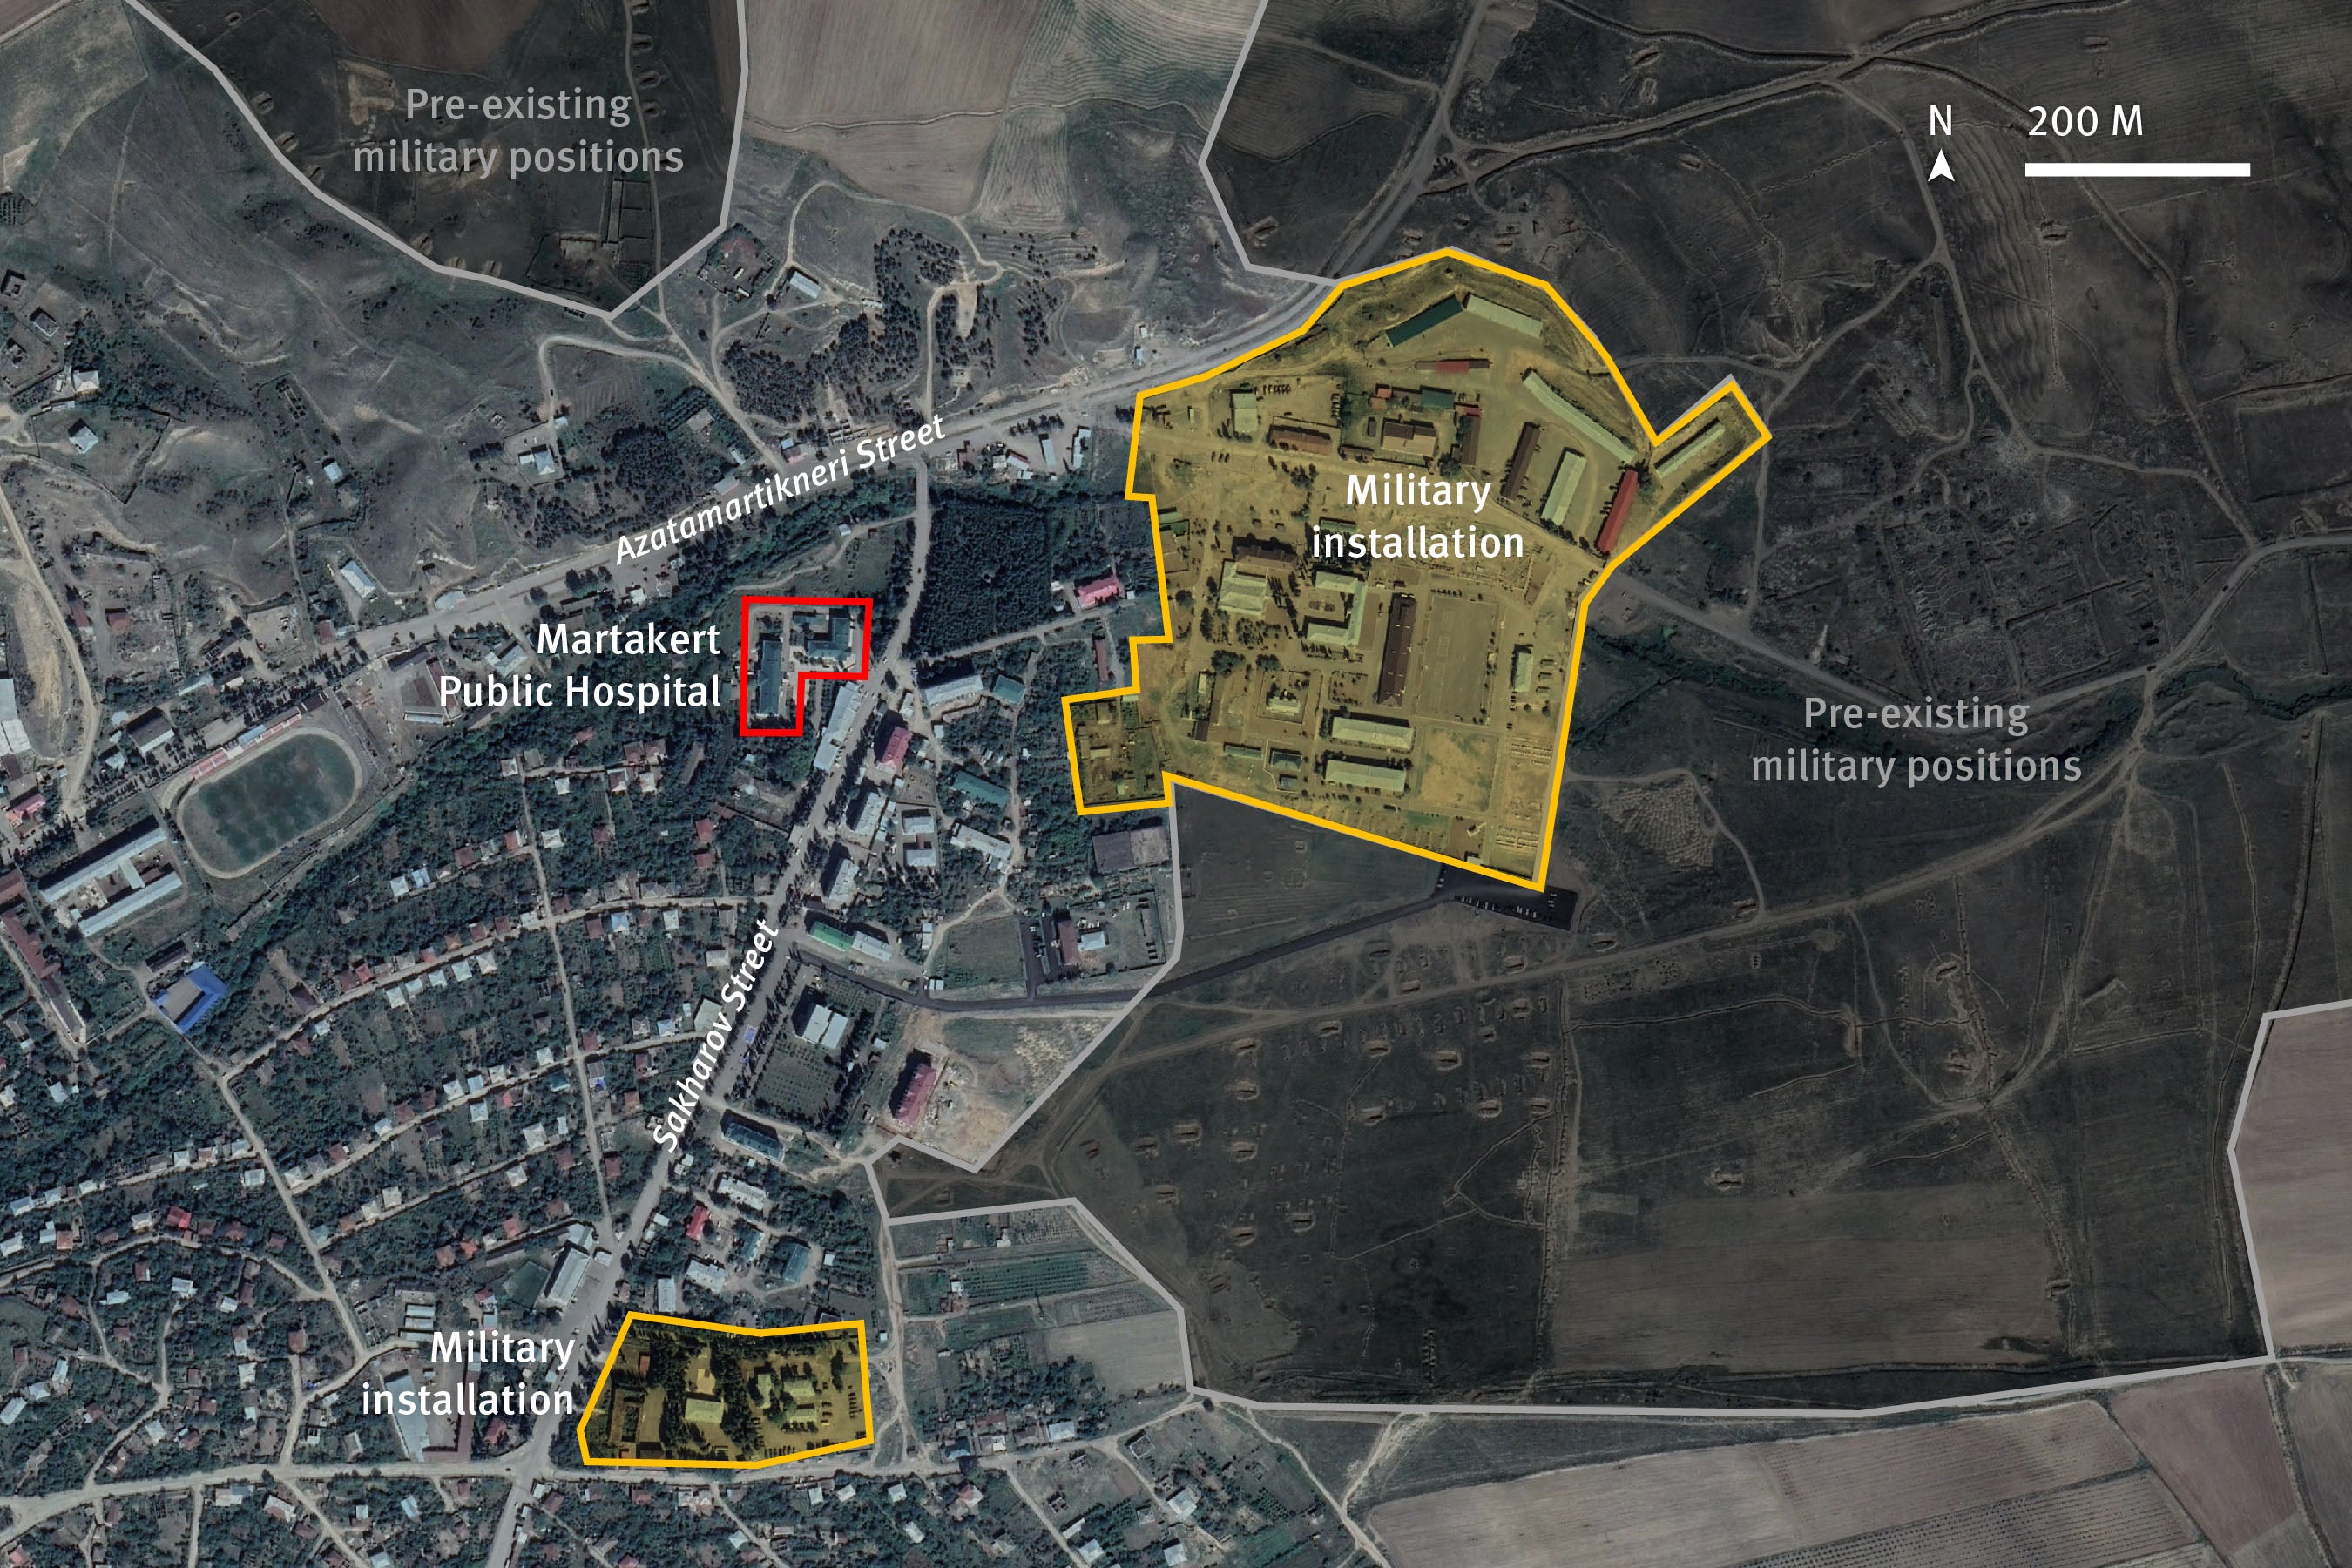 Location of potential military objects in the vicinity of the public hospital in Martakert. Satellite image date September 19, 2020.